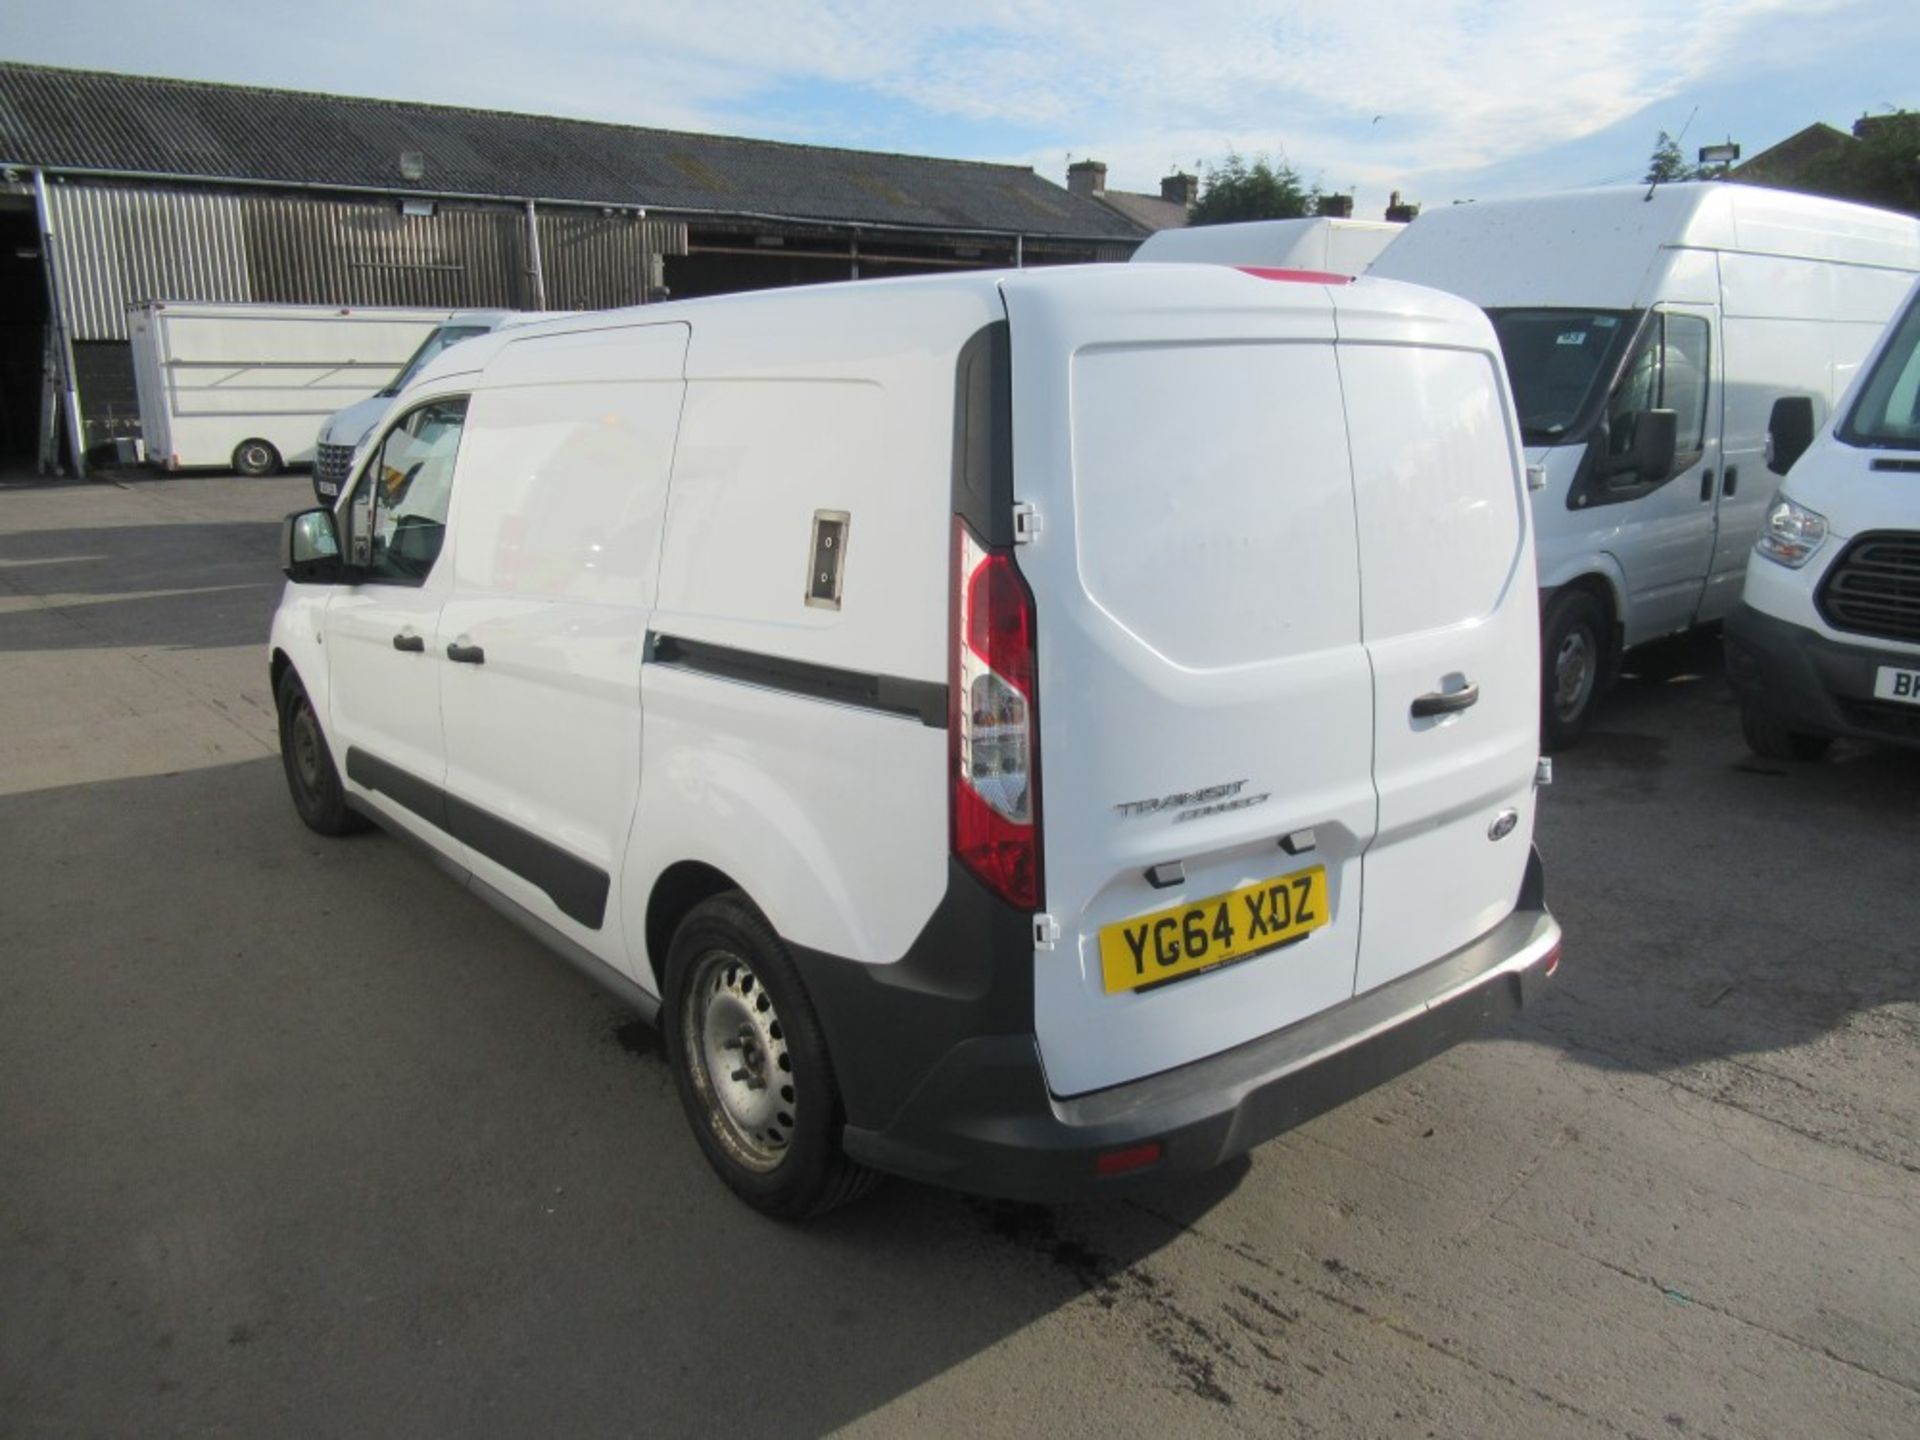 64 reg FORD TRANSIT CONNECT 210 ECO-TECH C/W REACH & WASH SYSTEM IN REAR, 1ST REG 09/14, 120053M - Image 3 of 7